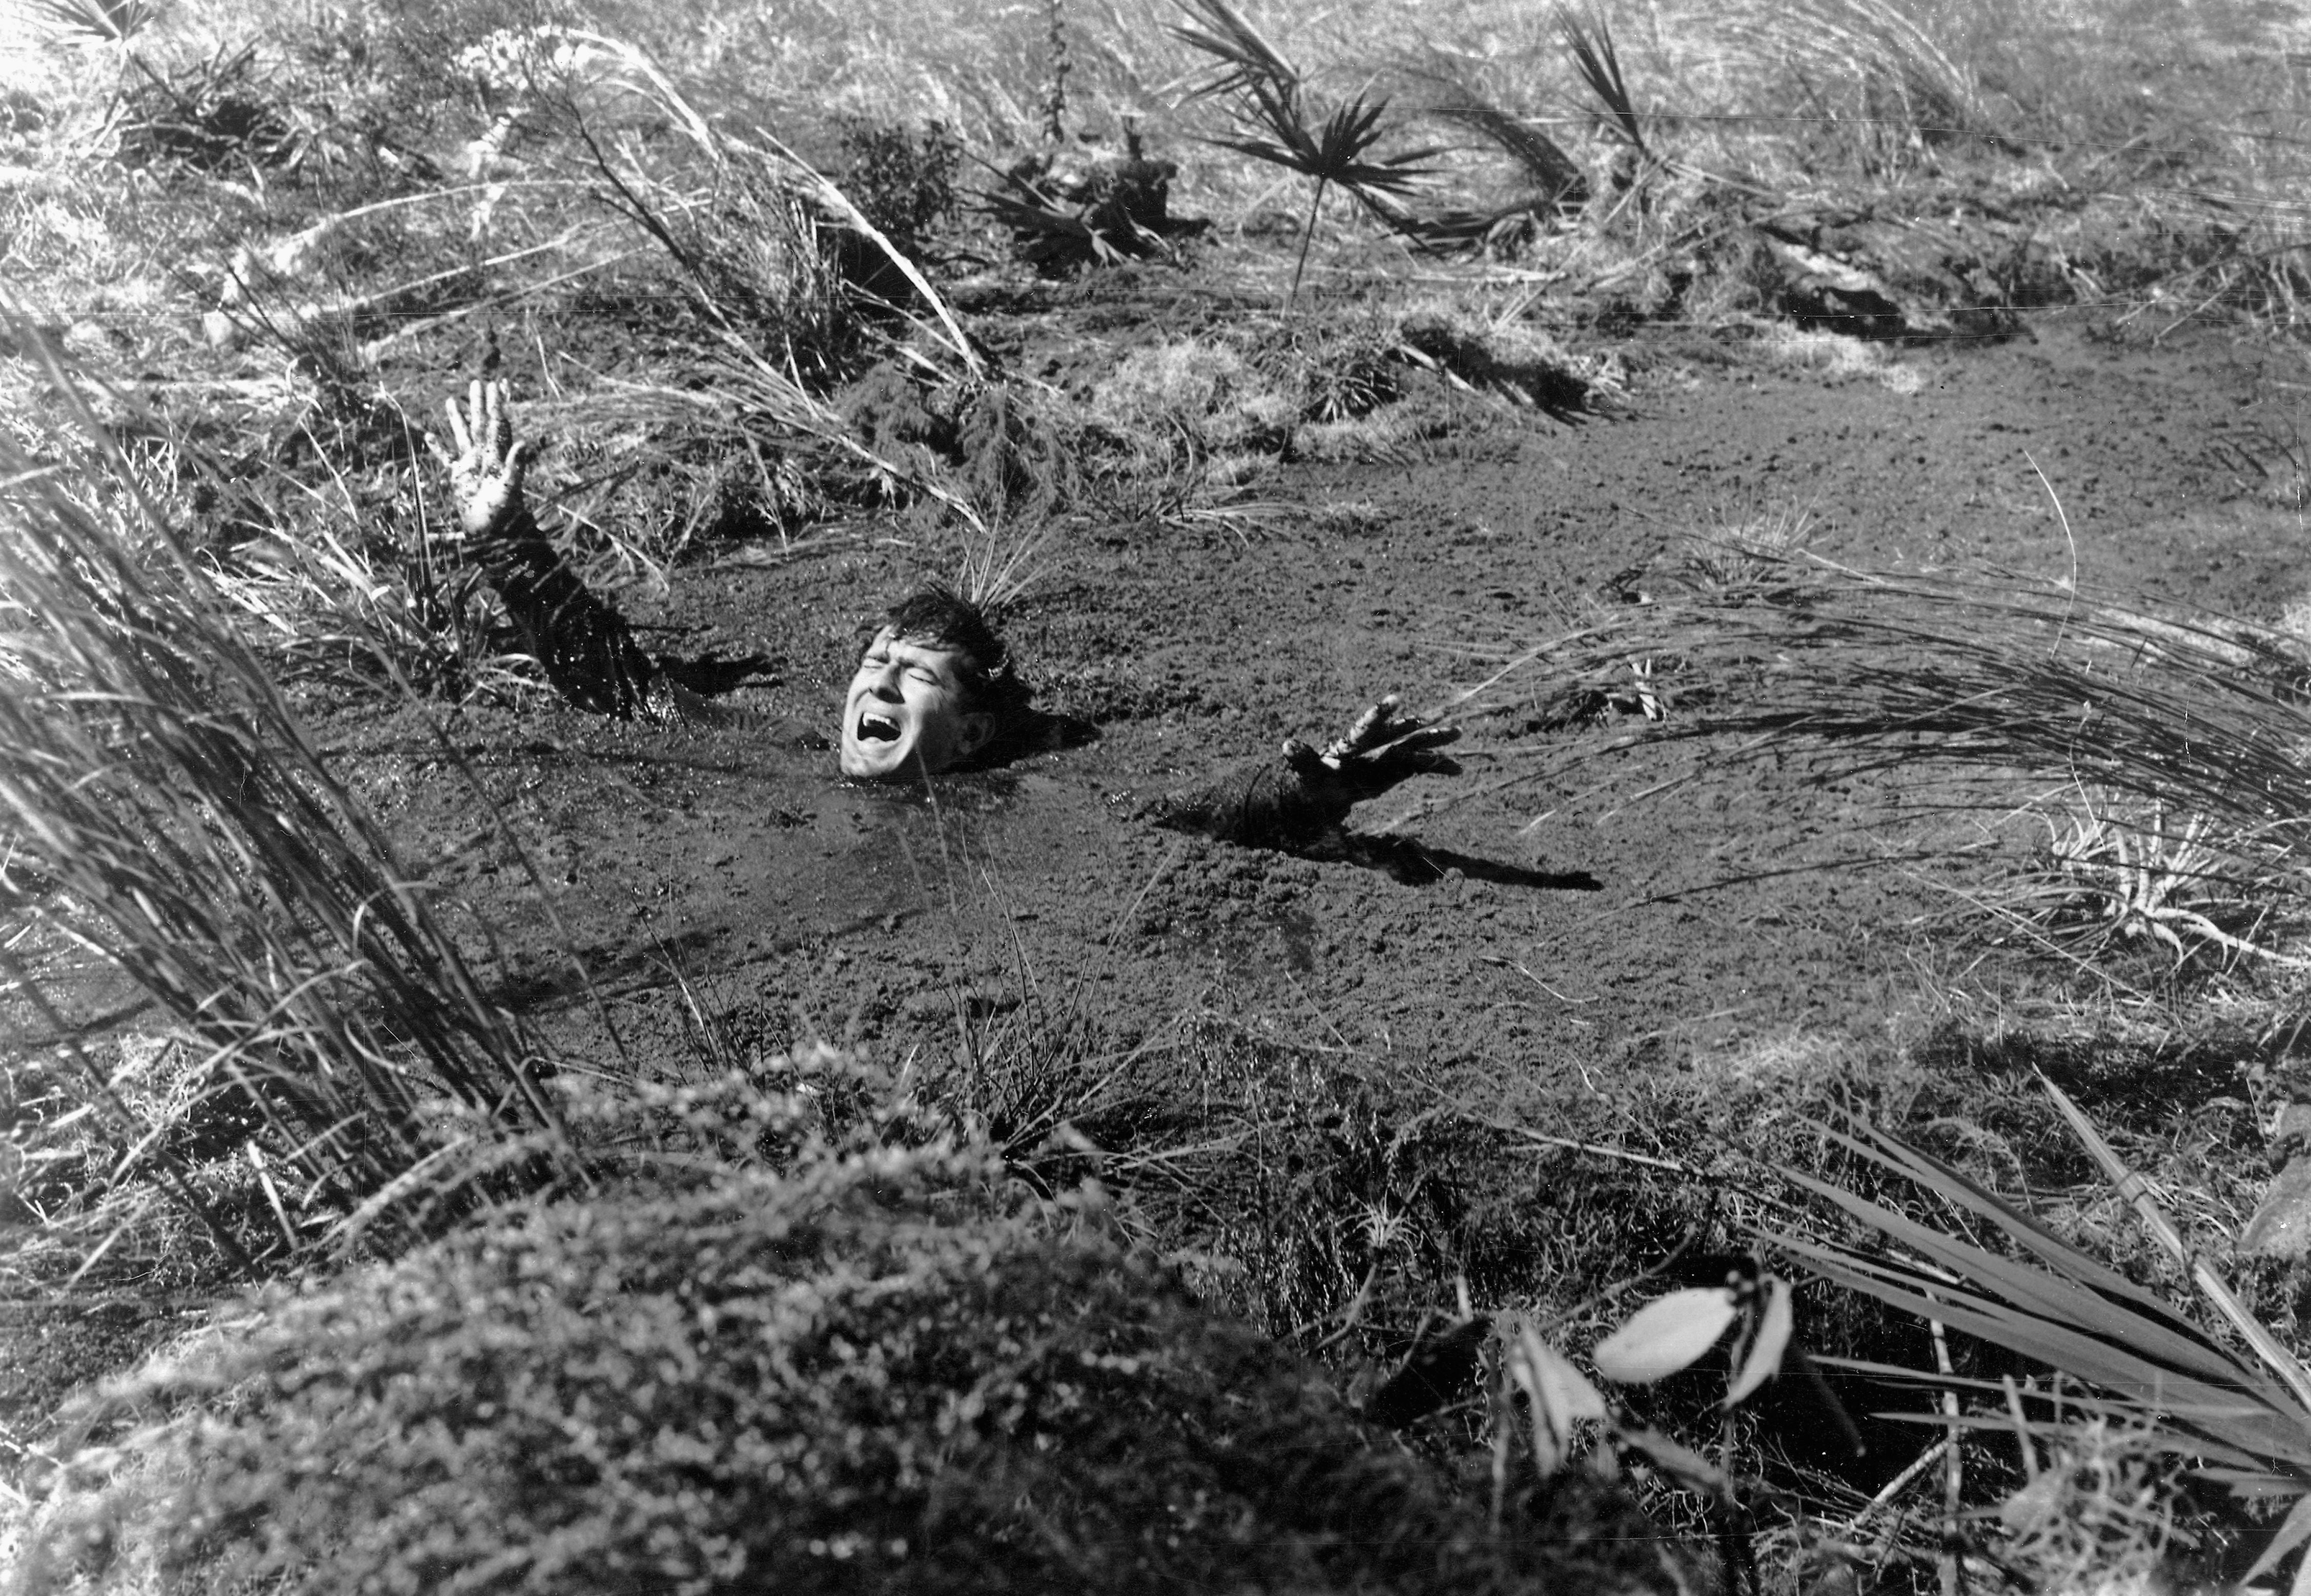 Death by quicksand in the film ‘Two Thousand Maniacs!’